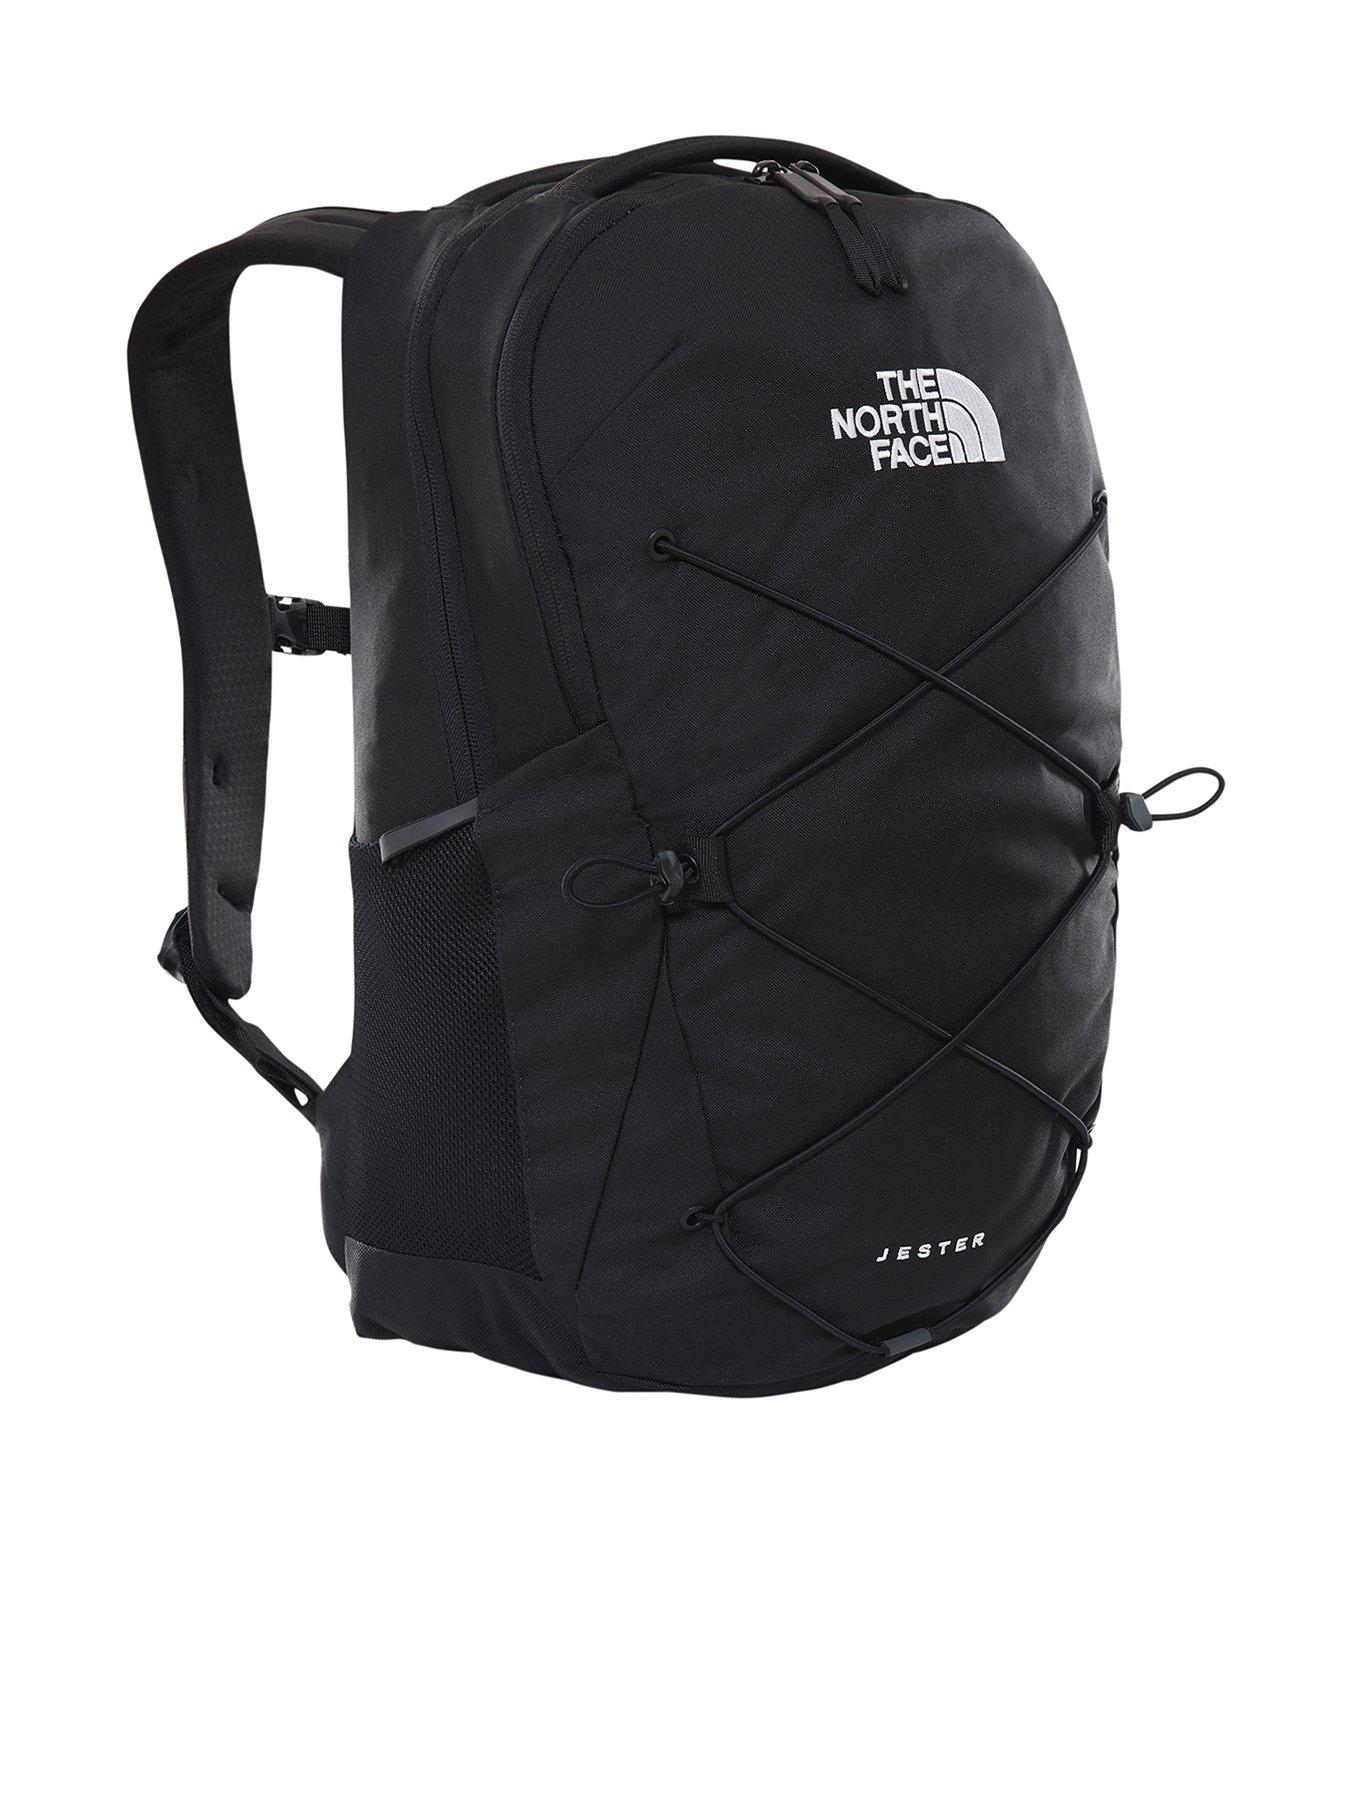 The north face | Bags \u0026 backpacks 